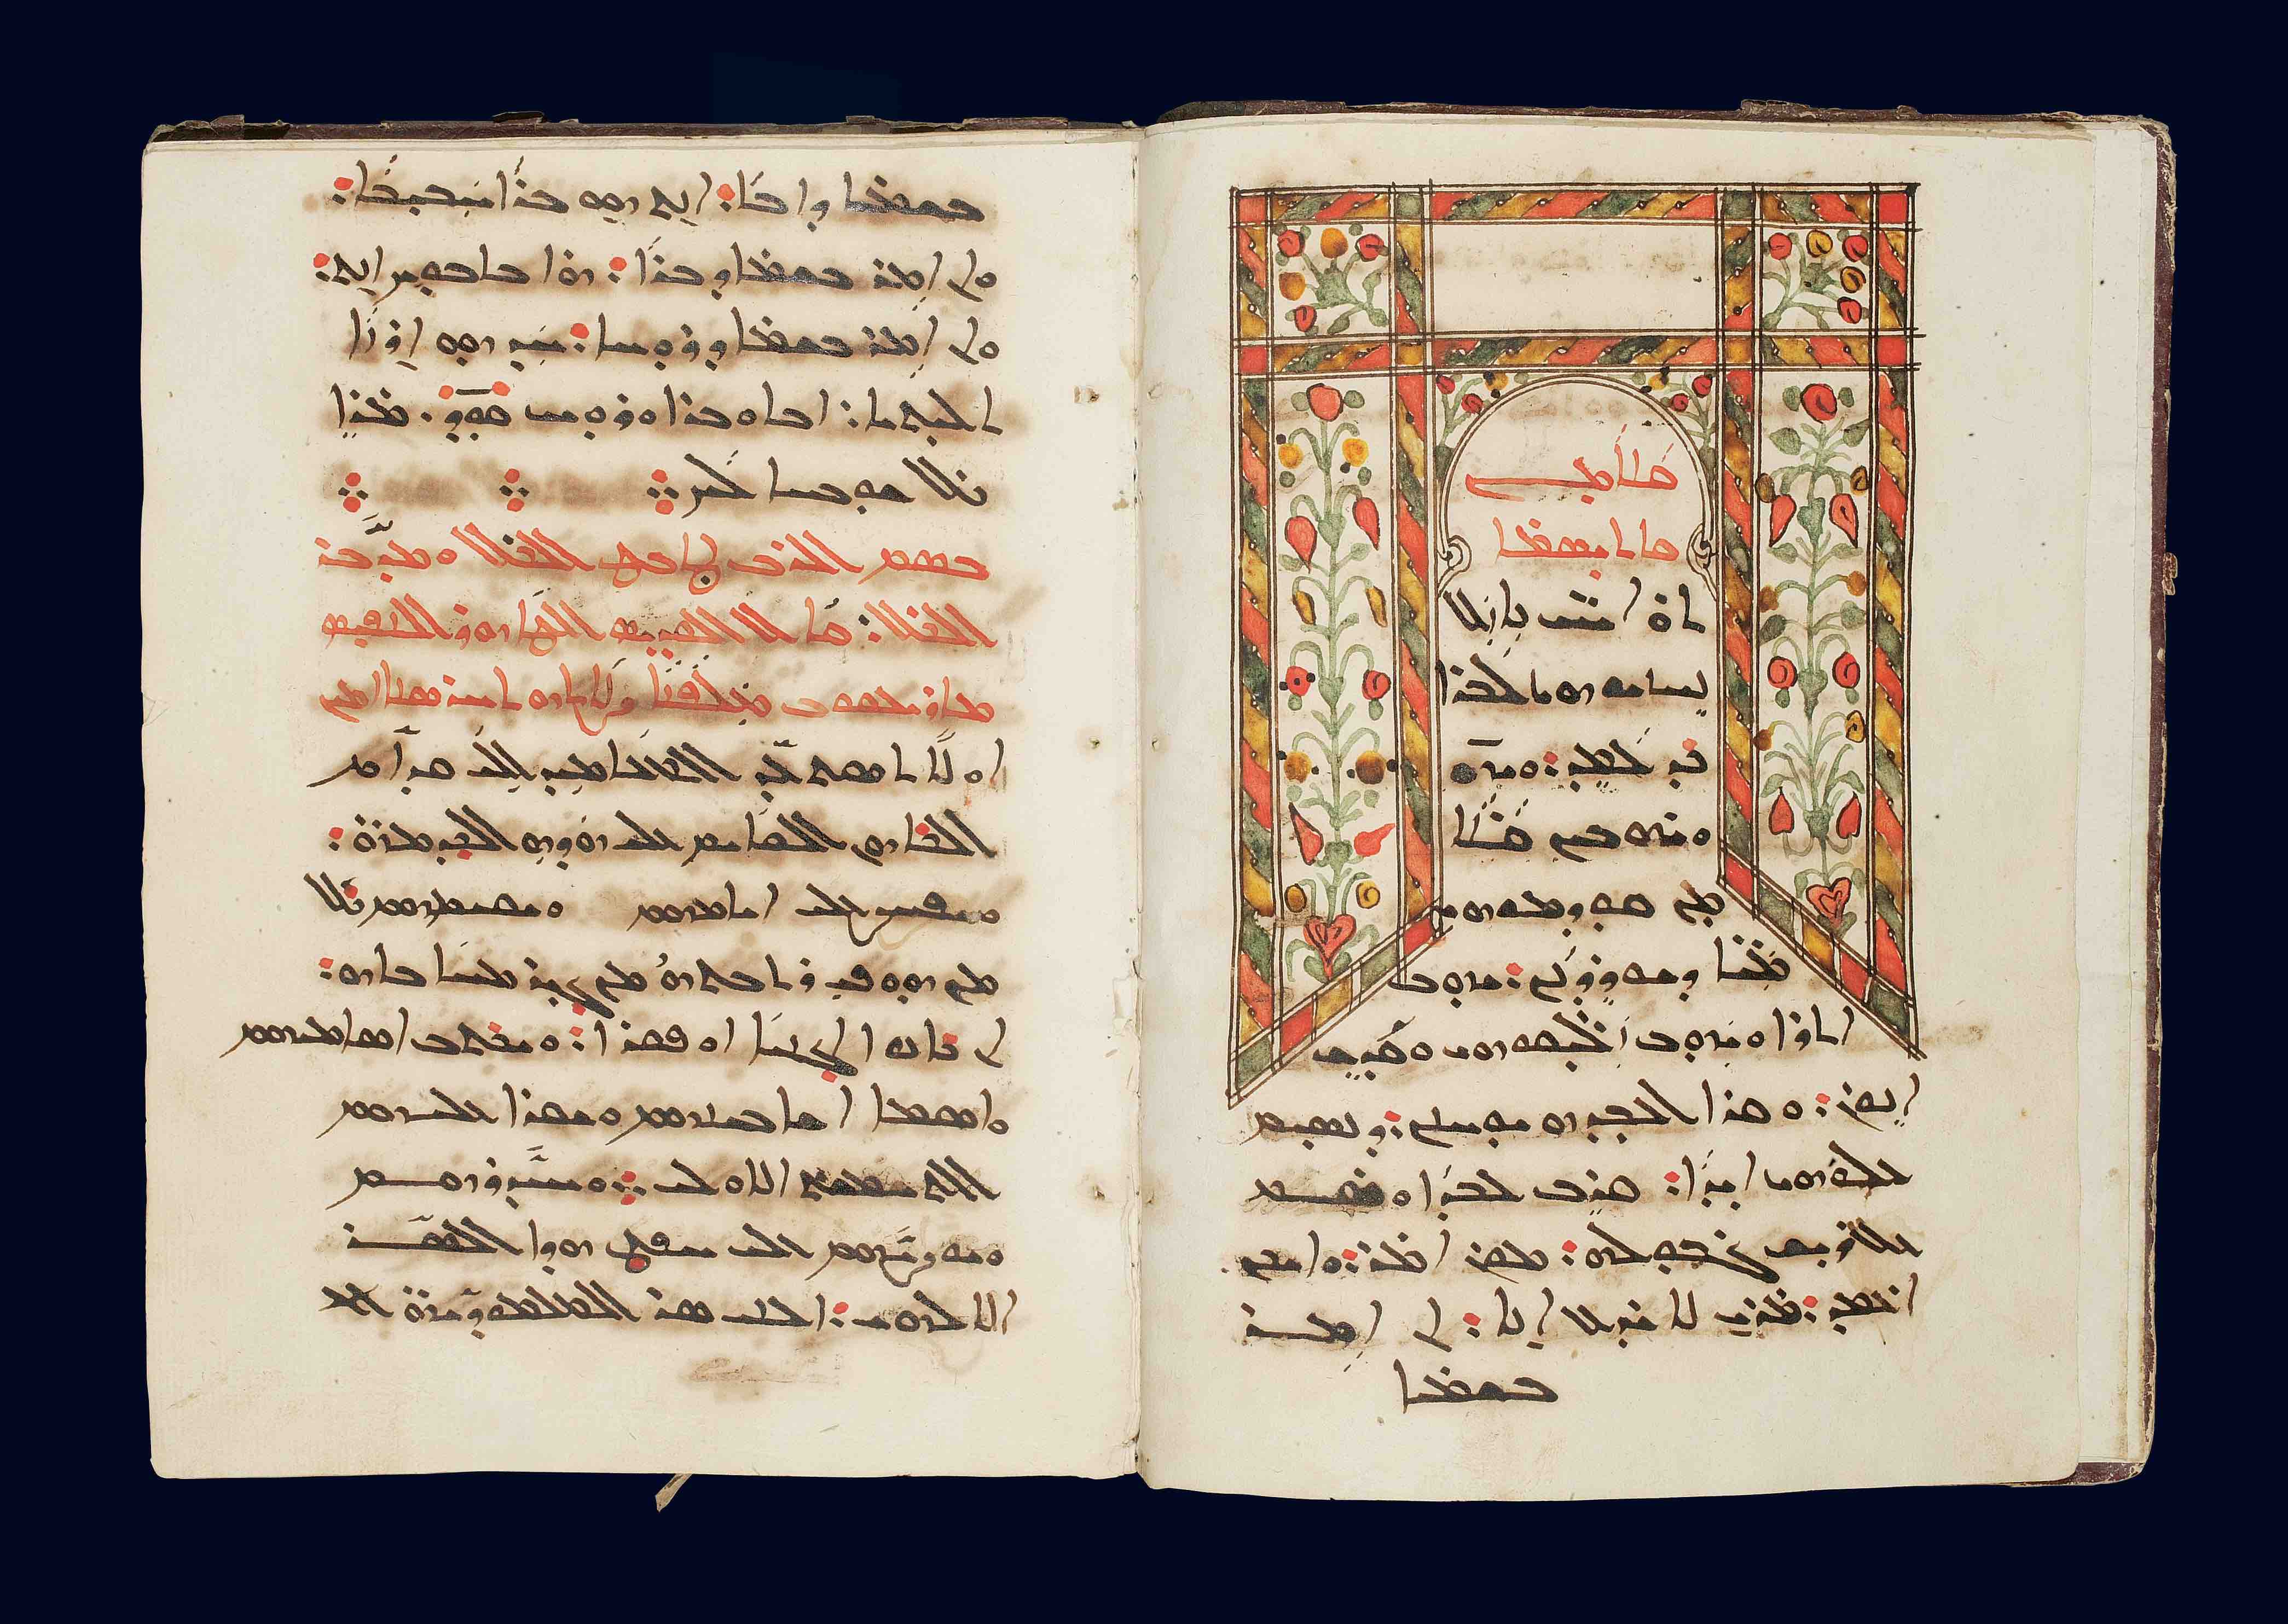 19th-c. liturgical book in Syriac and Arabic Garshuni from the Syrian Catholic Archdiocese of Aleppo (<a href='https://w3id.org/vhmml/readingRoom/view/512794'>SCAA SL07 09</a>)